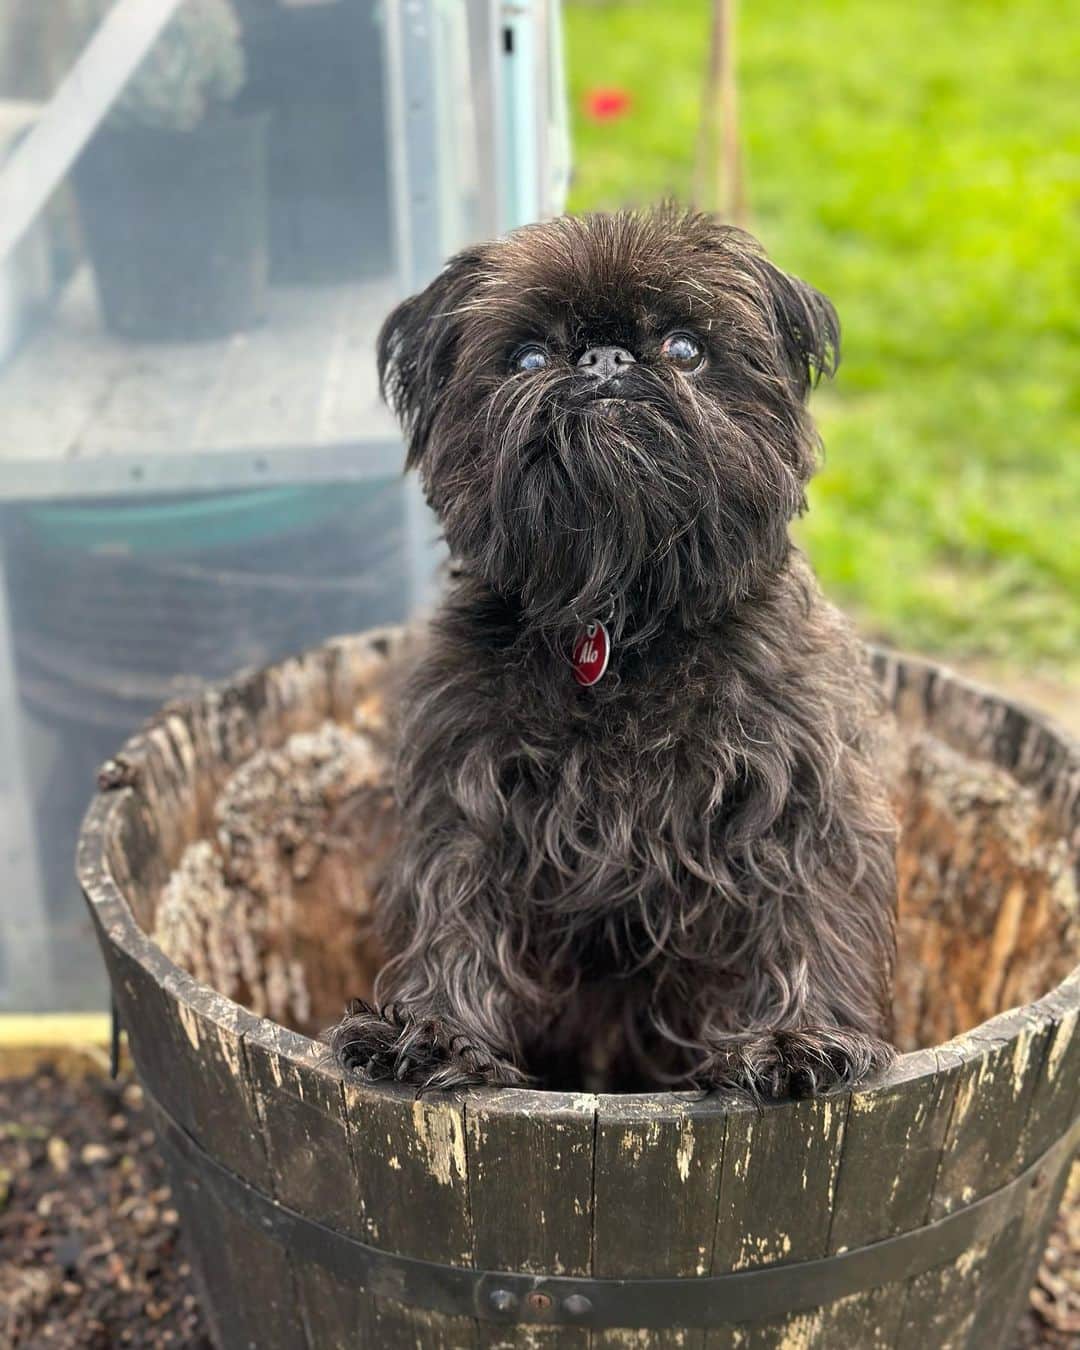 Digby & Aloのインスタグラム：「it’s almost spring which means it’s time to think about your spring garden! your griffons should be coming up about now but it’s not too late to plant if you haven’t already. they like very specific conditions so make sure you get it right - i planted plenty of treats and his favourite orange ball, but griffons in your area may have refined taste so i’d try a beef tenderloin or something else expensive and delicious. also you definitely have to let alo know where you live for… monitoring. he definitely won’t come and eat the steak then leave. 🫣」